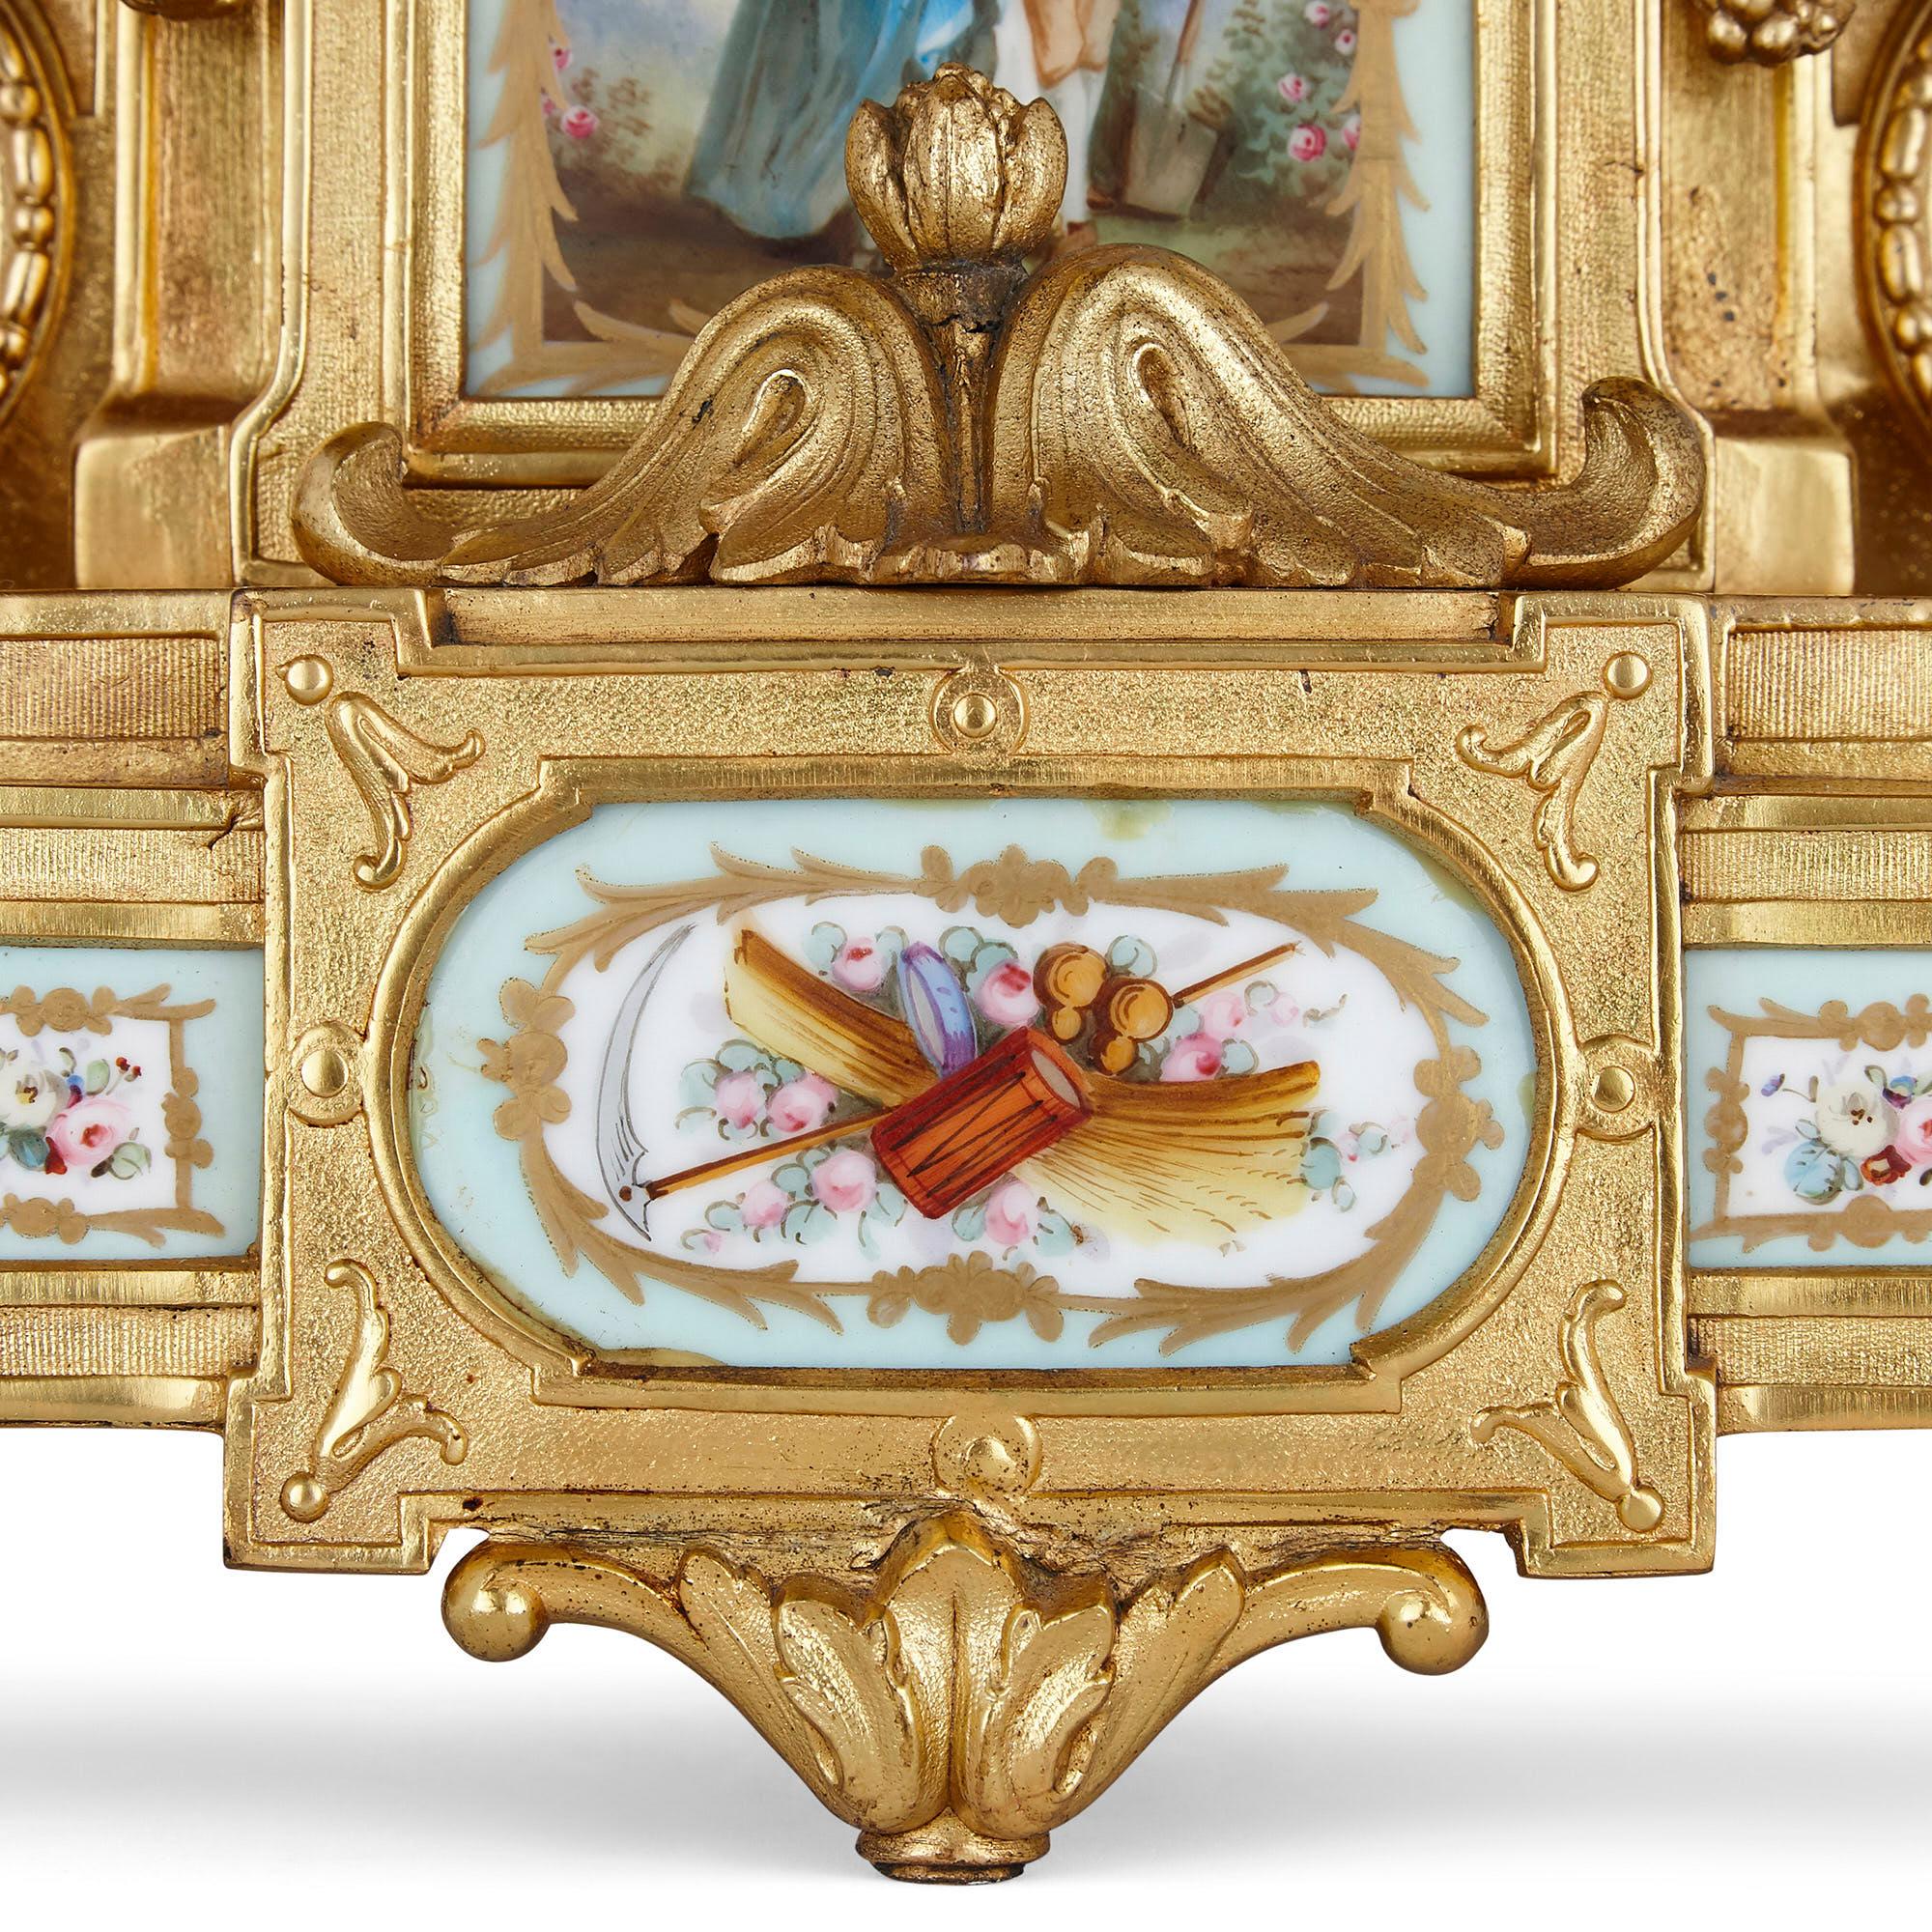 19th Century Rococo Style Gilt Bronze Mantel Clock with Sèvres Style Porcelain Plaques For Sale